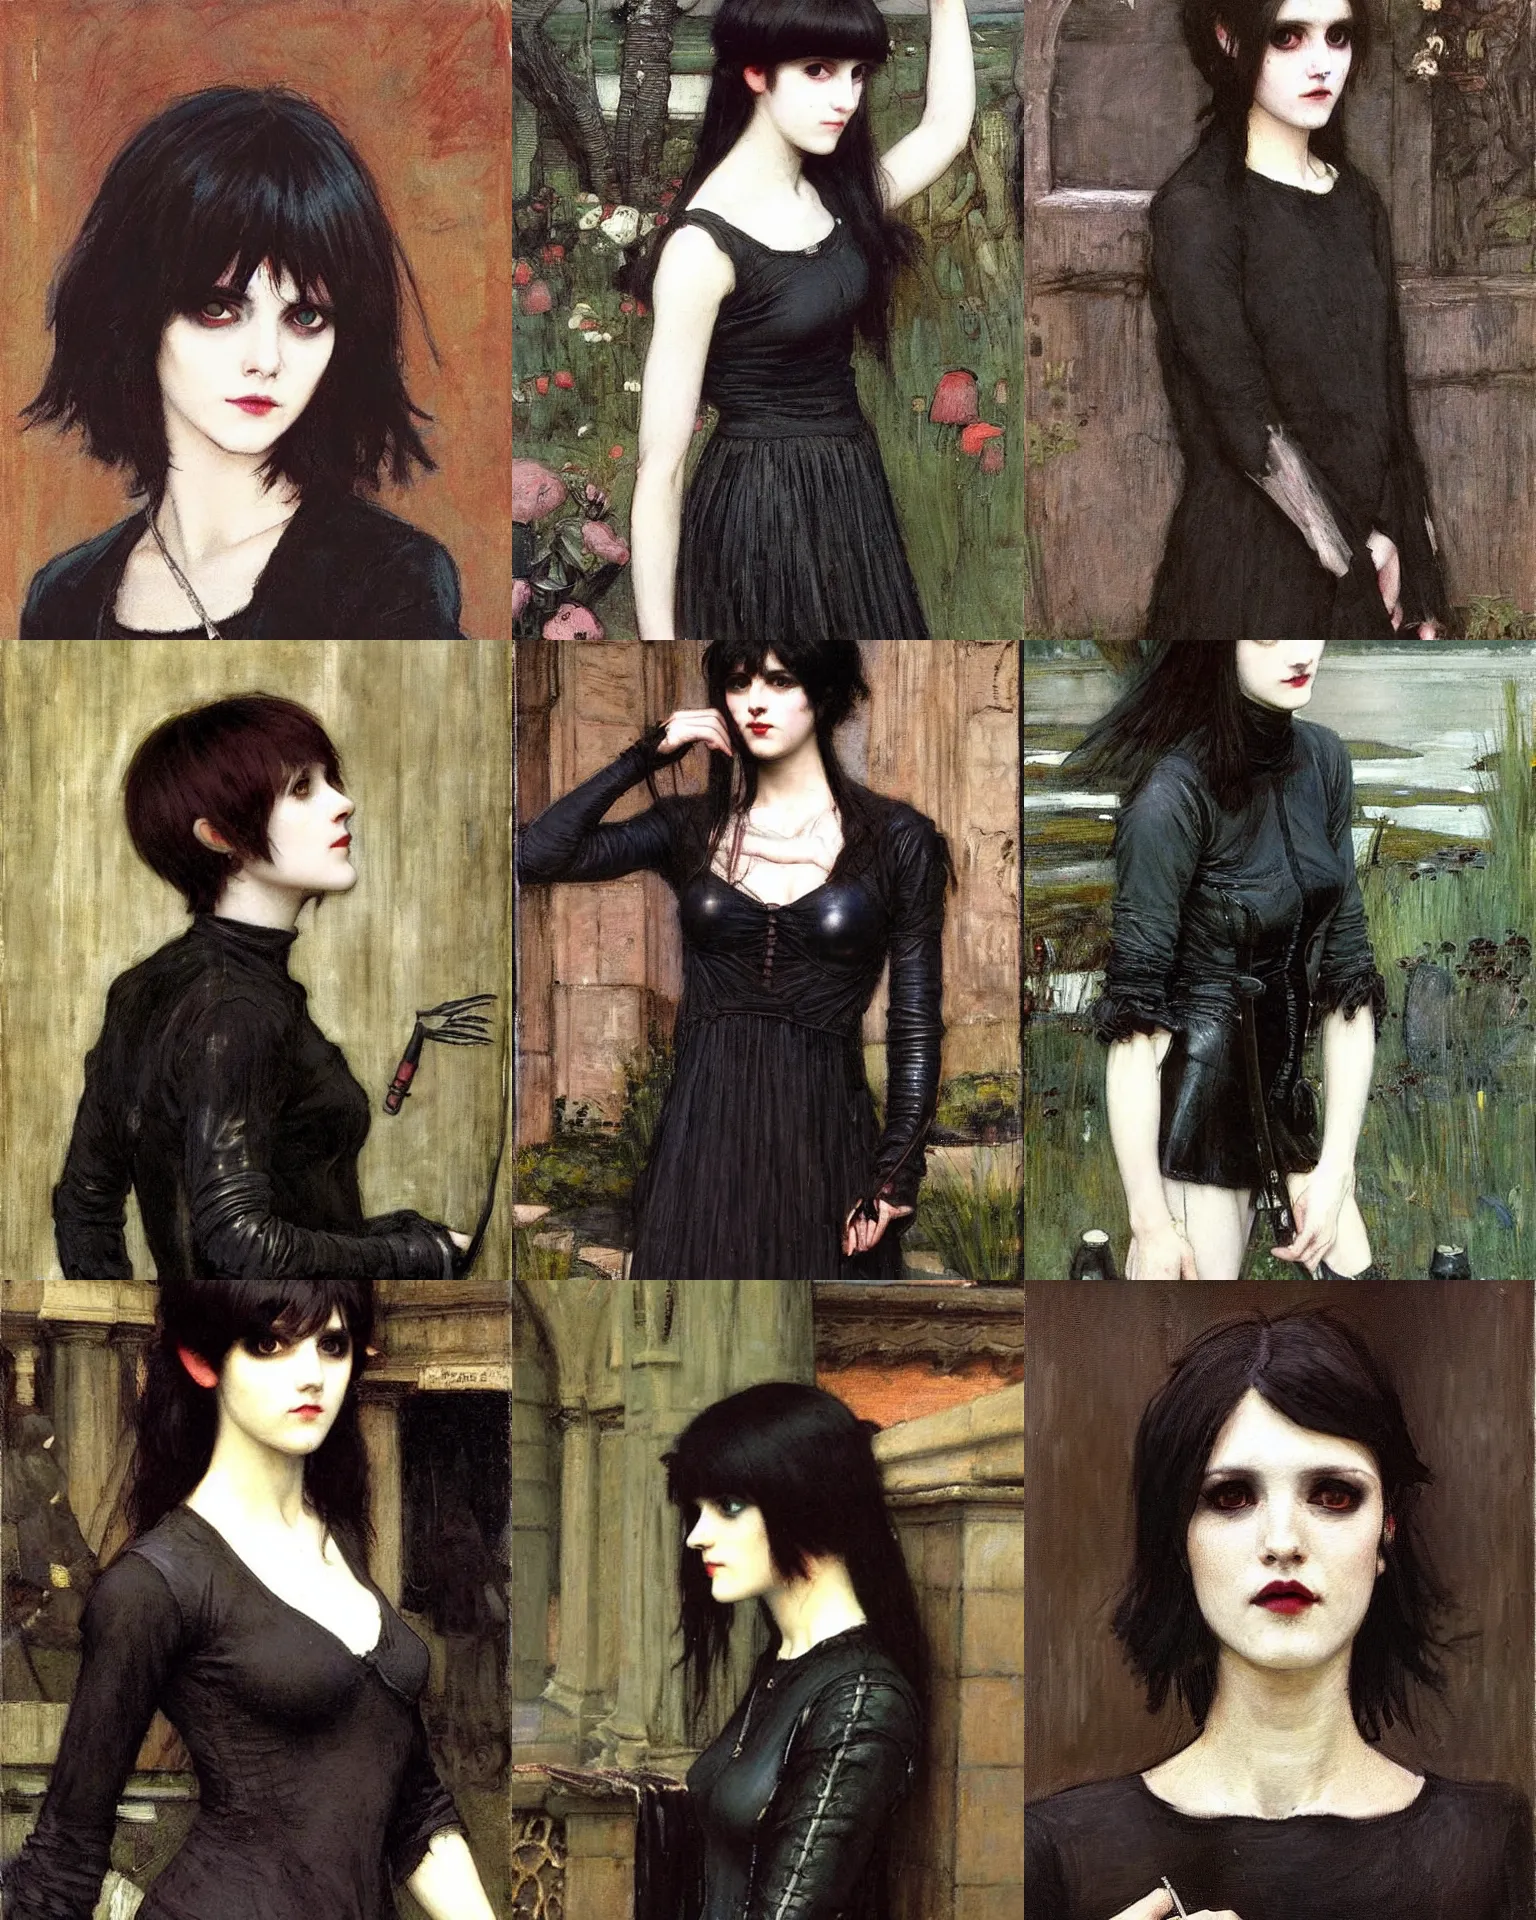 Prompt: A goth painted by John William Waterhouse. She has large evil eyes with entirely-black sclerae!!!!!! Her hair is dark brown and cut into a short, messy pixie cut. She has a slightly rounded face, with a pointed chin, and a small nose. She is wearing a black leather jacket, a black knee-length skirt, a black choker, and black leather boots.